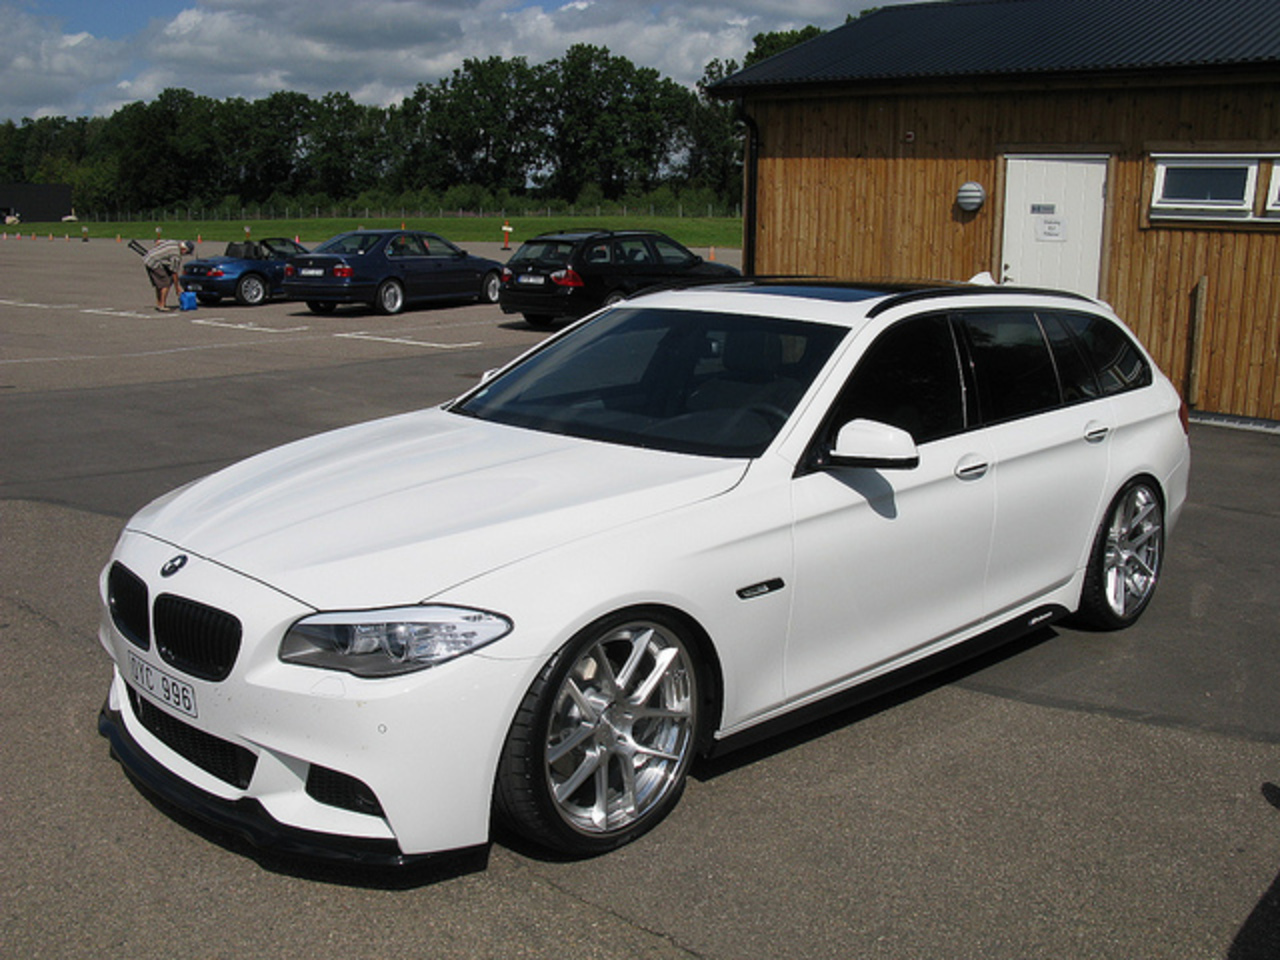 BMW 520d Touring M Sport F11 | Flickr - Photo Sharing!